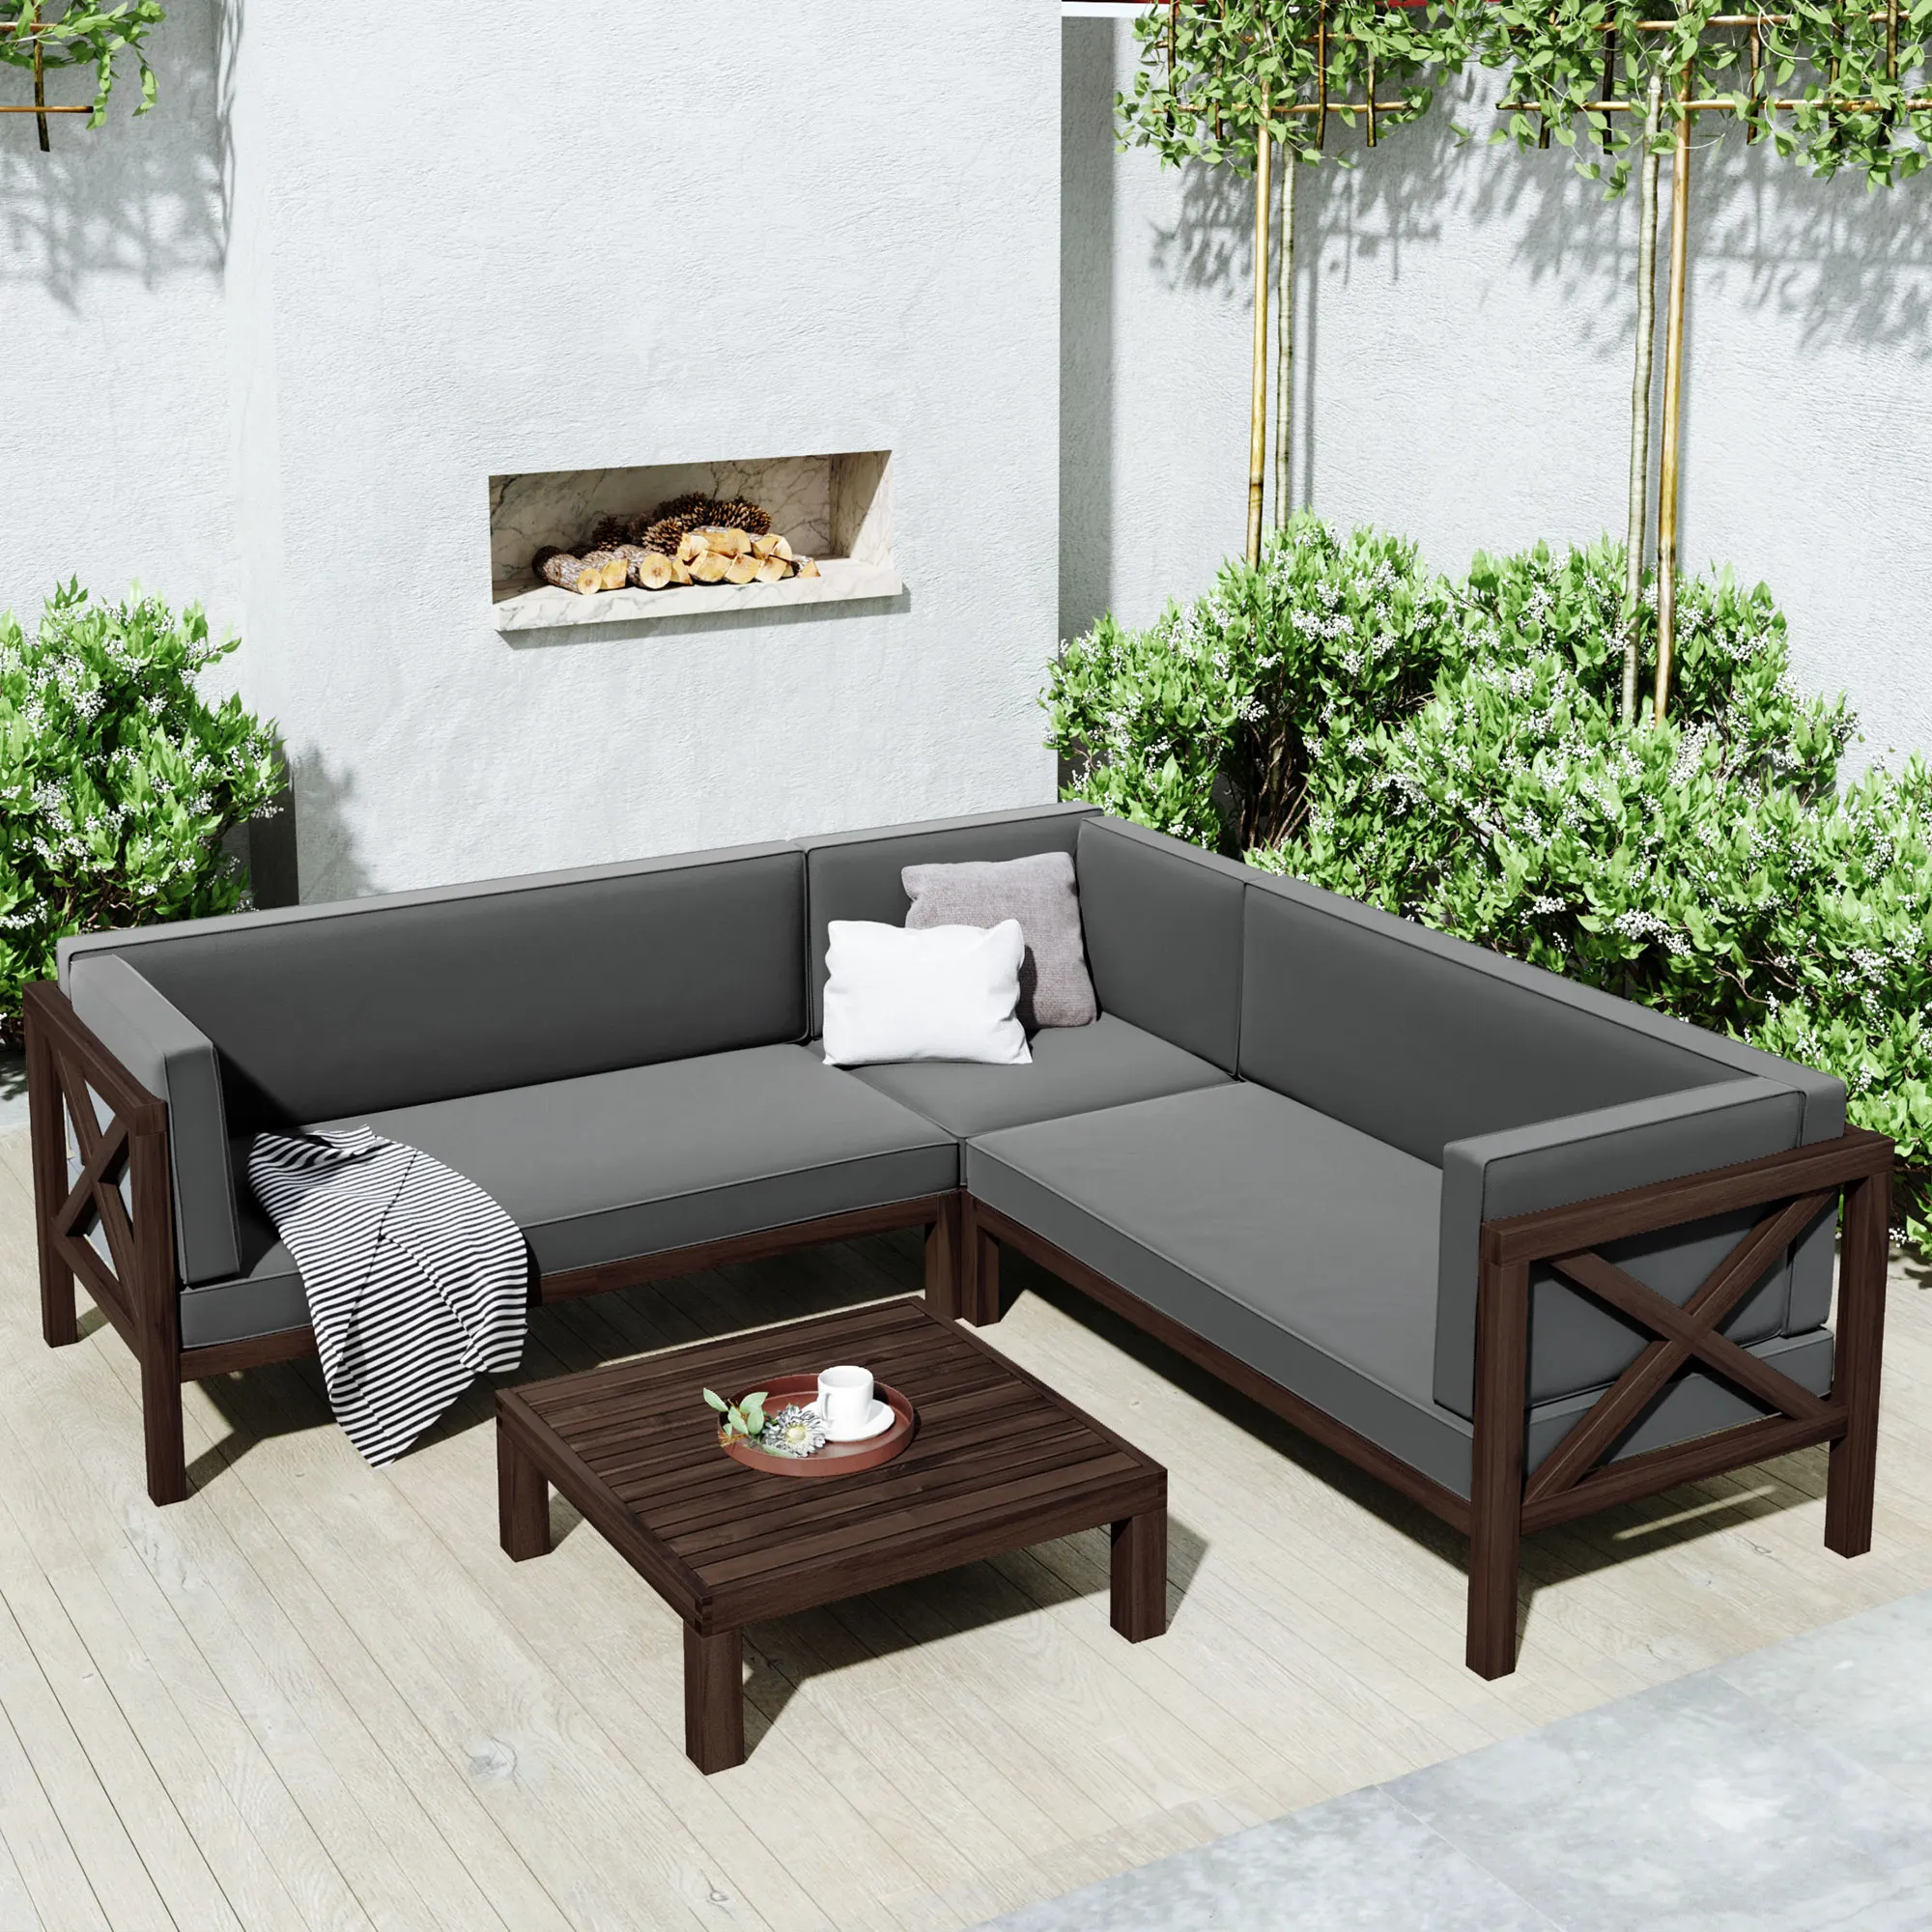 

Outdoor furniture Set Wood Patio Backyard 4-Pc Sectional Seating Group with Cushions and Table X-Back Sofa Set for Small Places